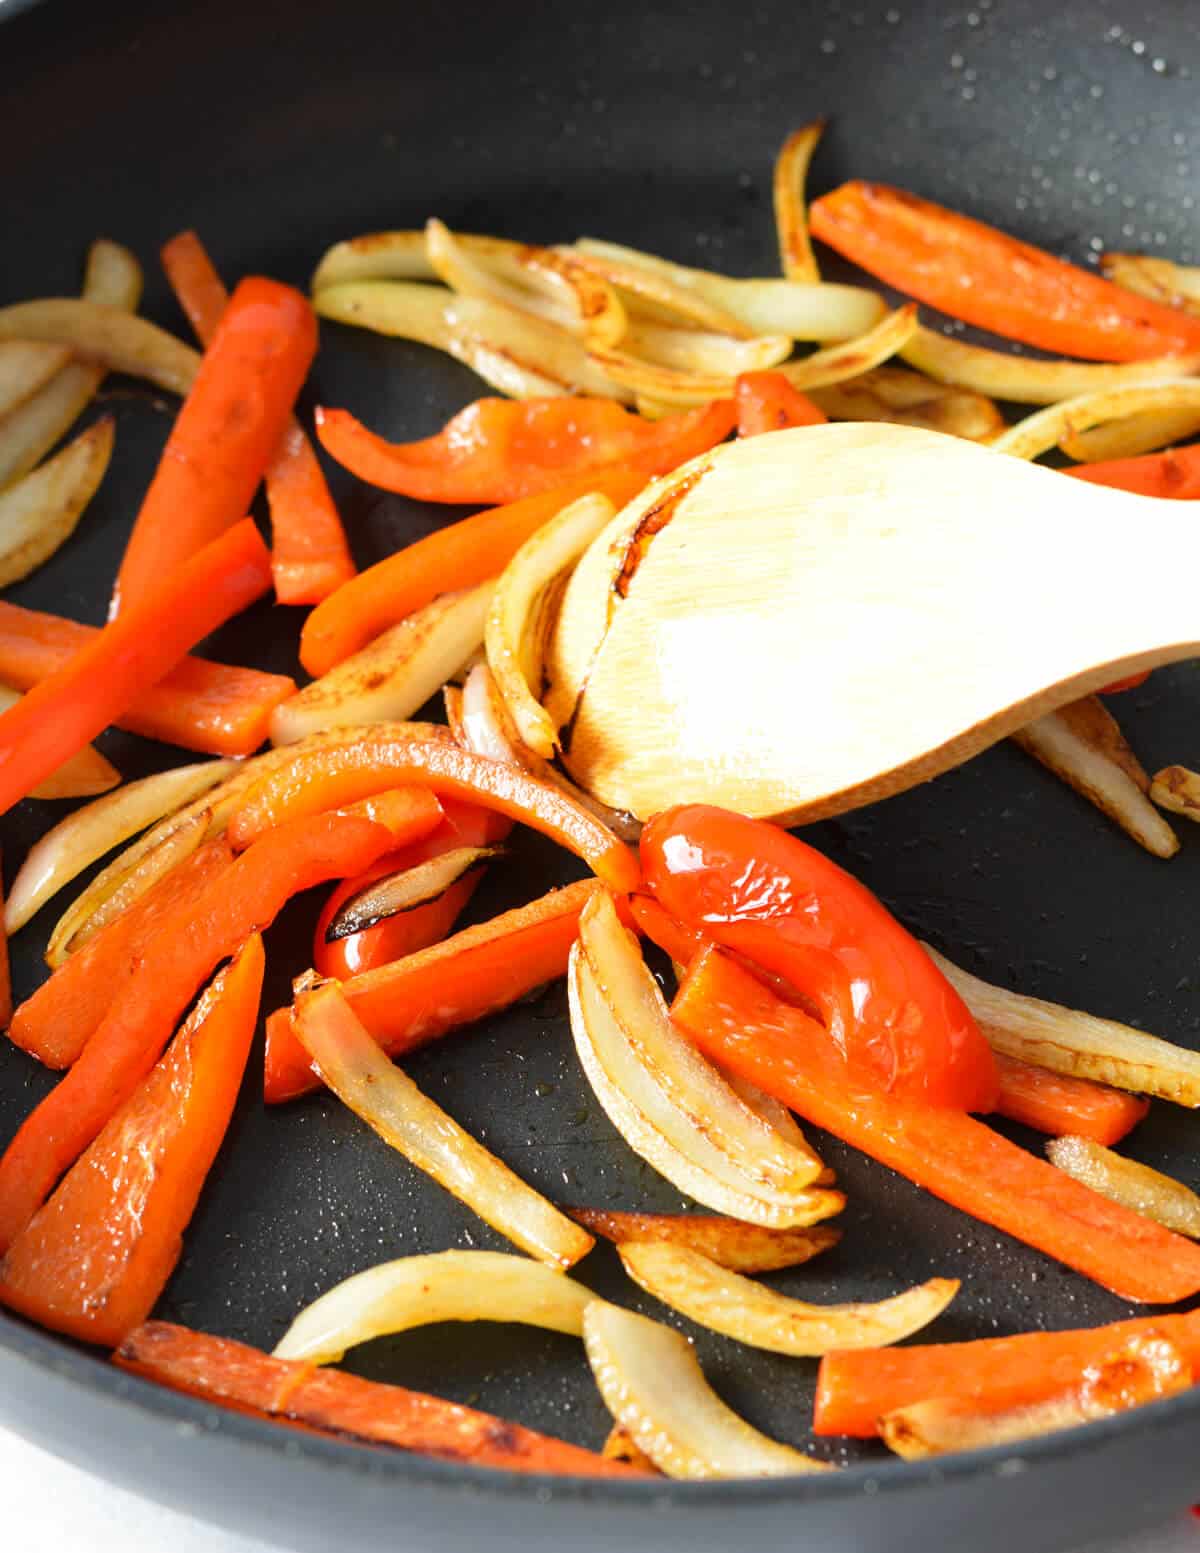 caramelized onions and peppers in a skillet.